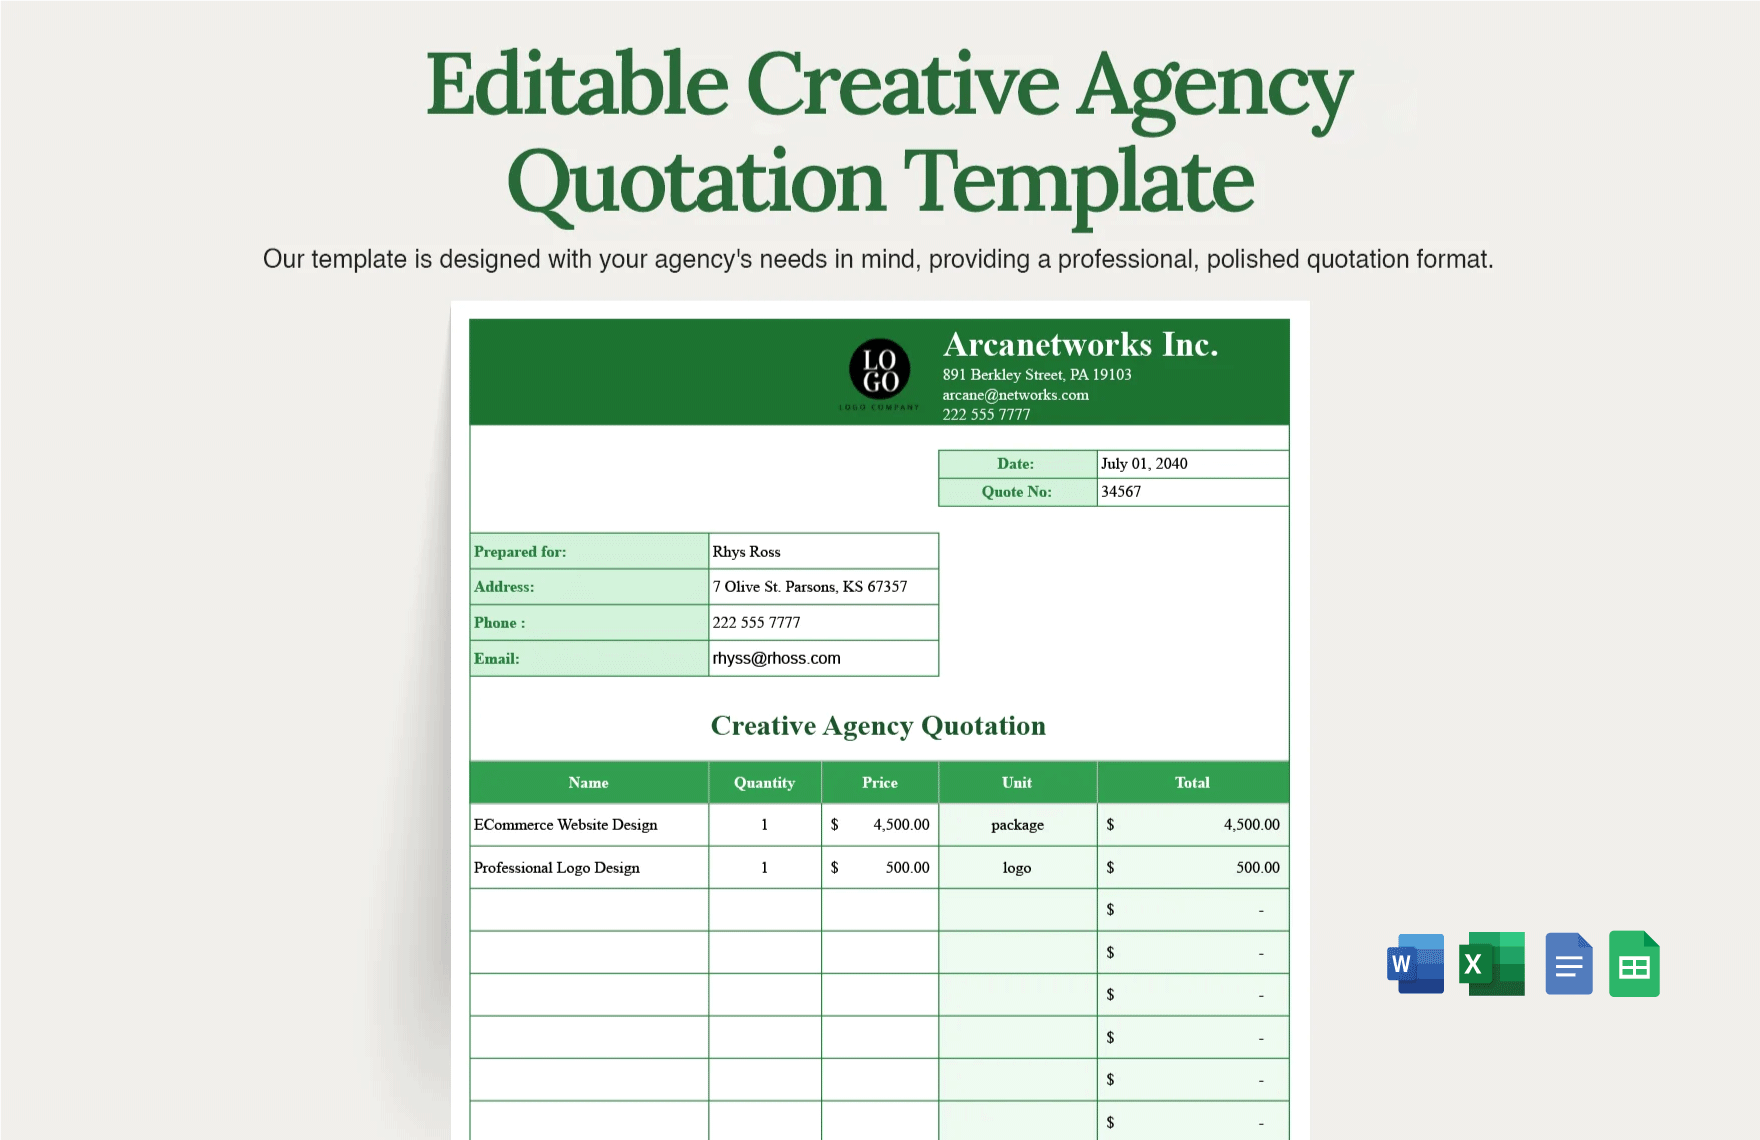 Free Editable Creative Agency Quotation Template in Word, Google Docs, Excel, Google Sheets